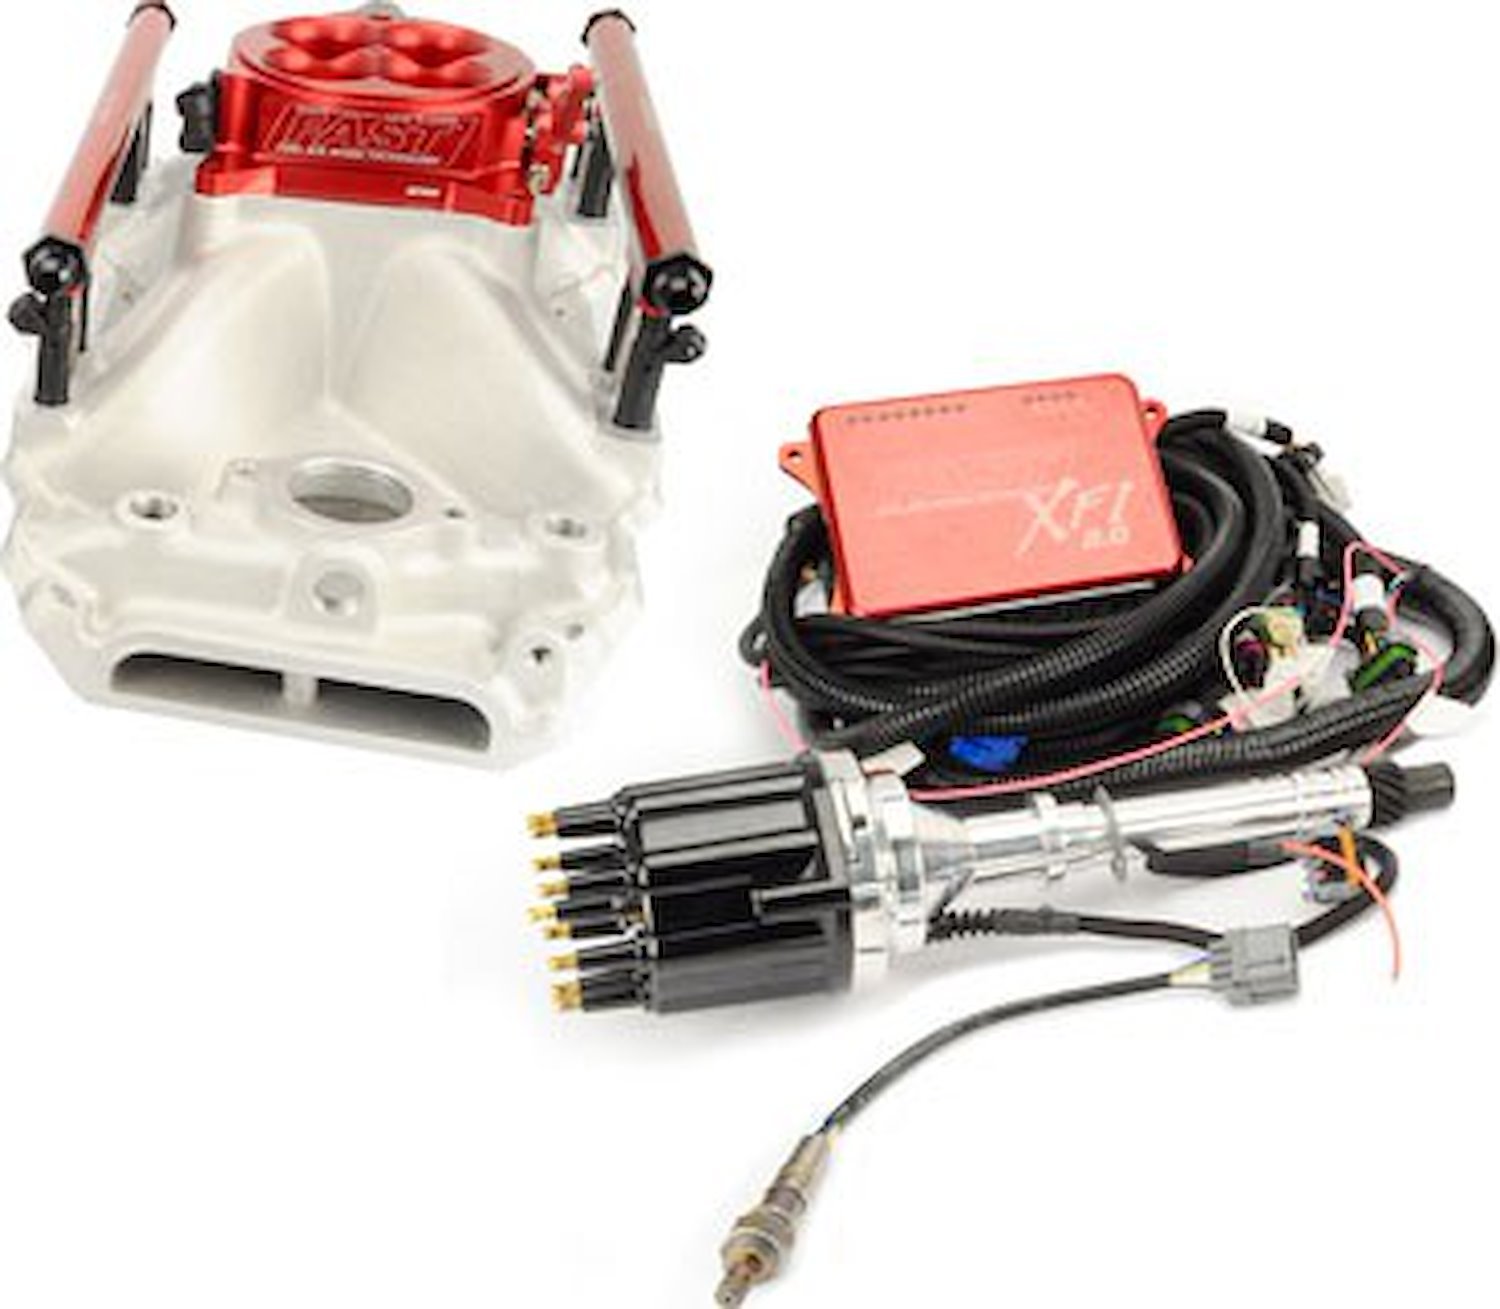 EFI KIT COMPLETE BBC UP TO 5